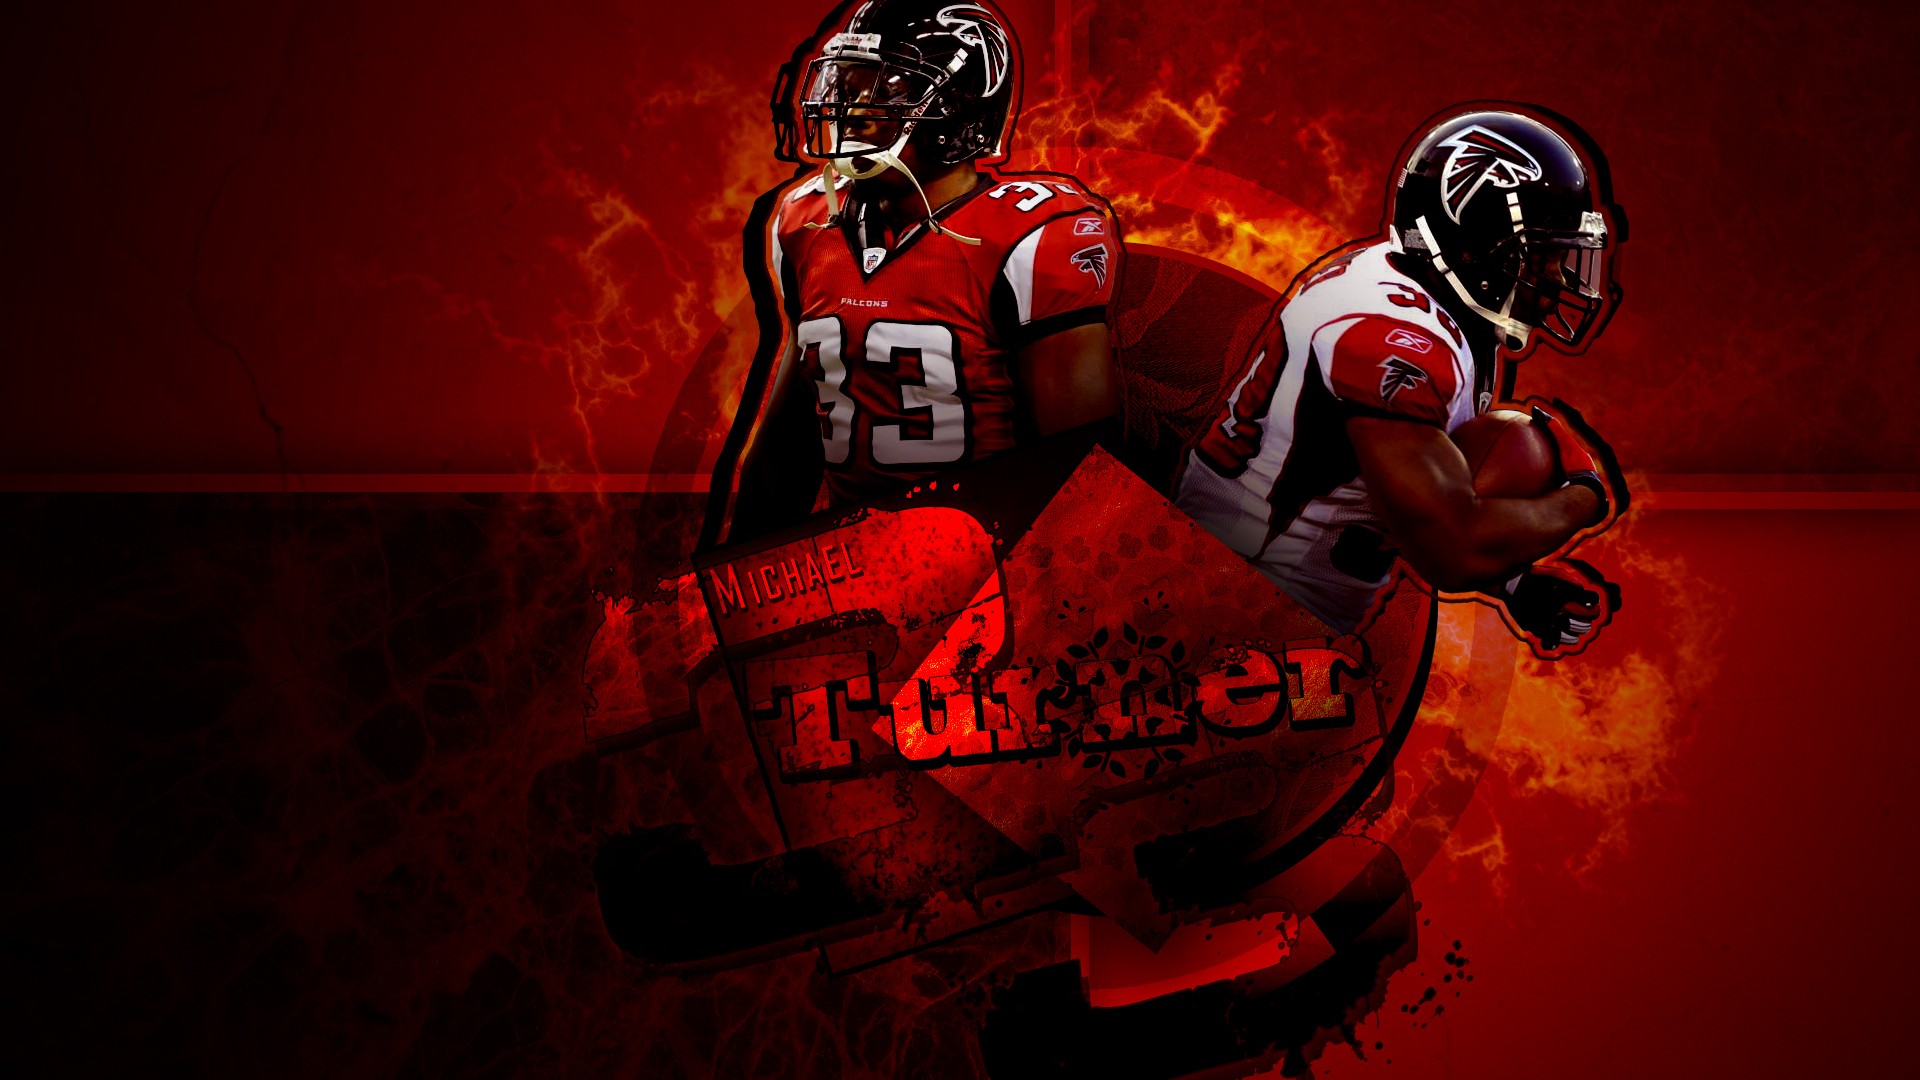 Falcons Wallpaper HD with high-resolution 1920x1080 pixel. You can use this wallpaper for your Mac or Windows Desktop Background, iPhone, Android or Tablet and another Smartphone device